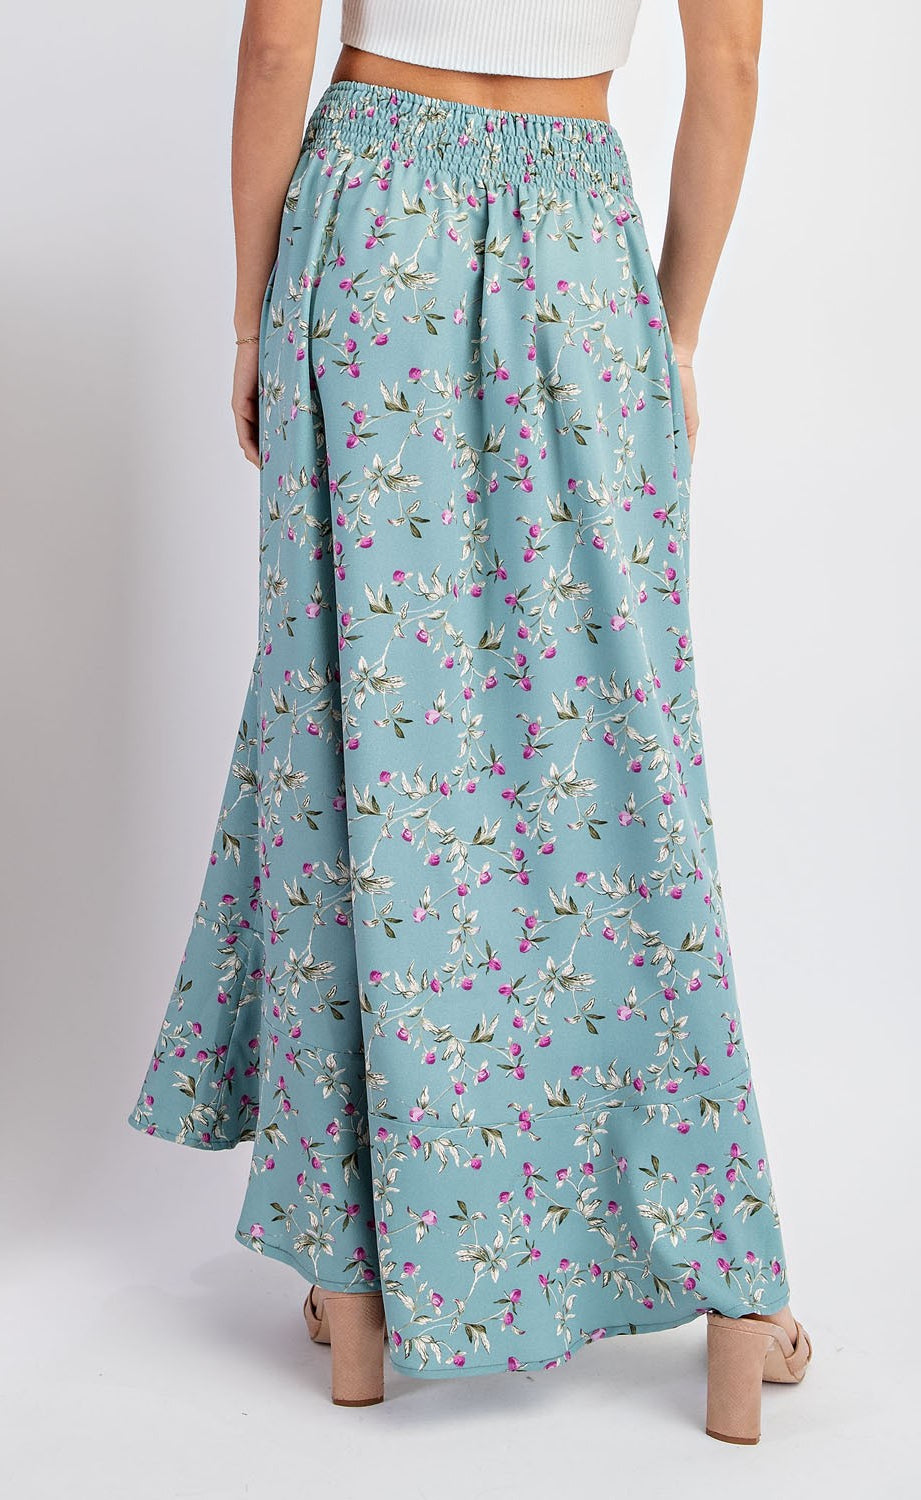 Floral Button Down Maxi Skirt in Sage    Skirt eesome- Tilden Co.